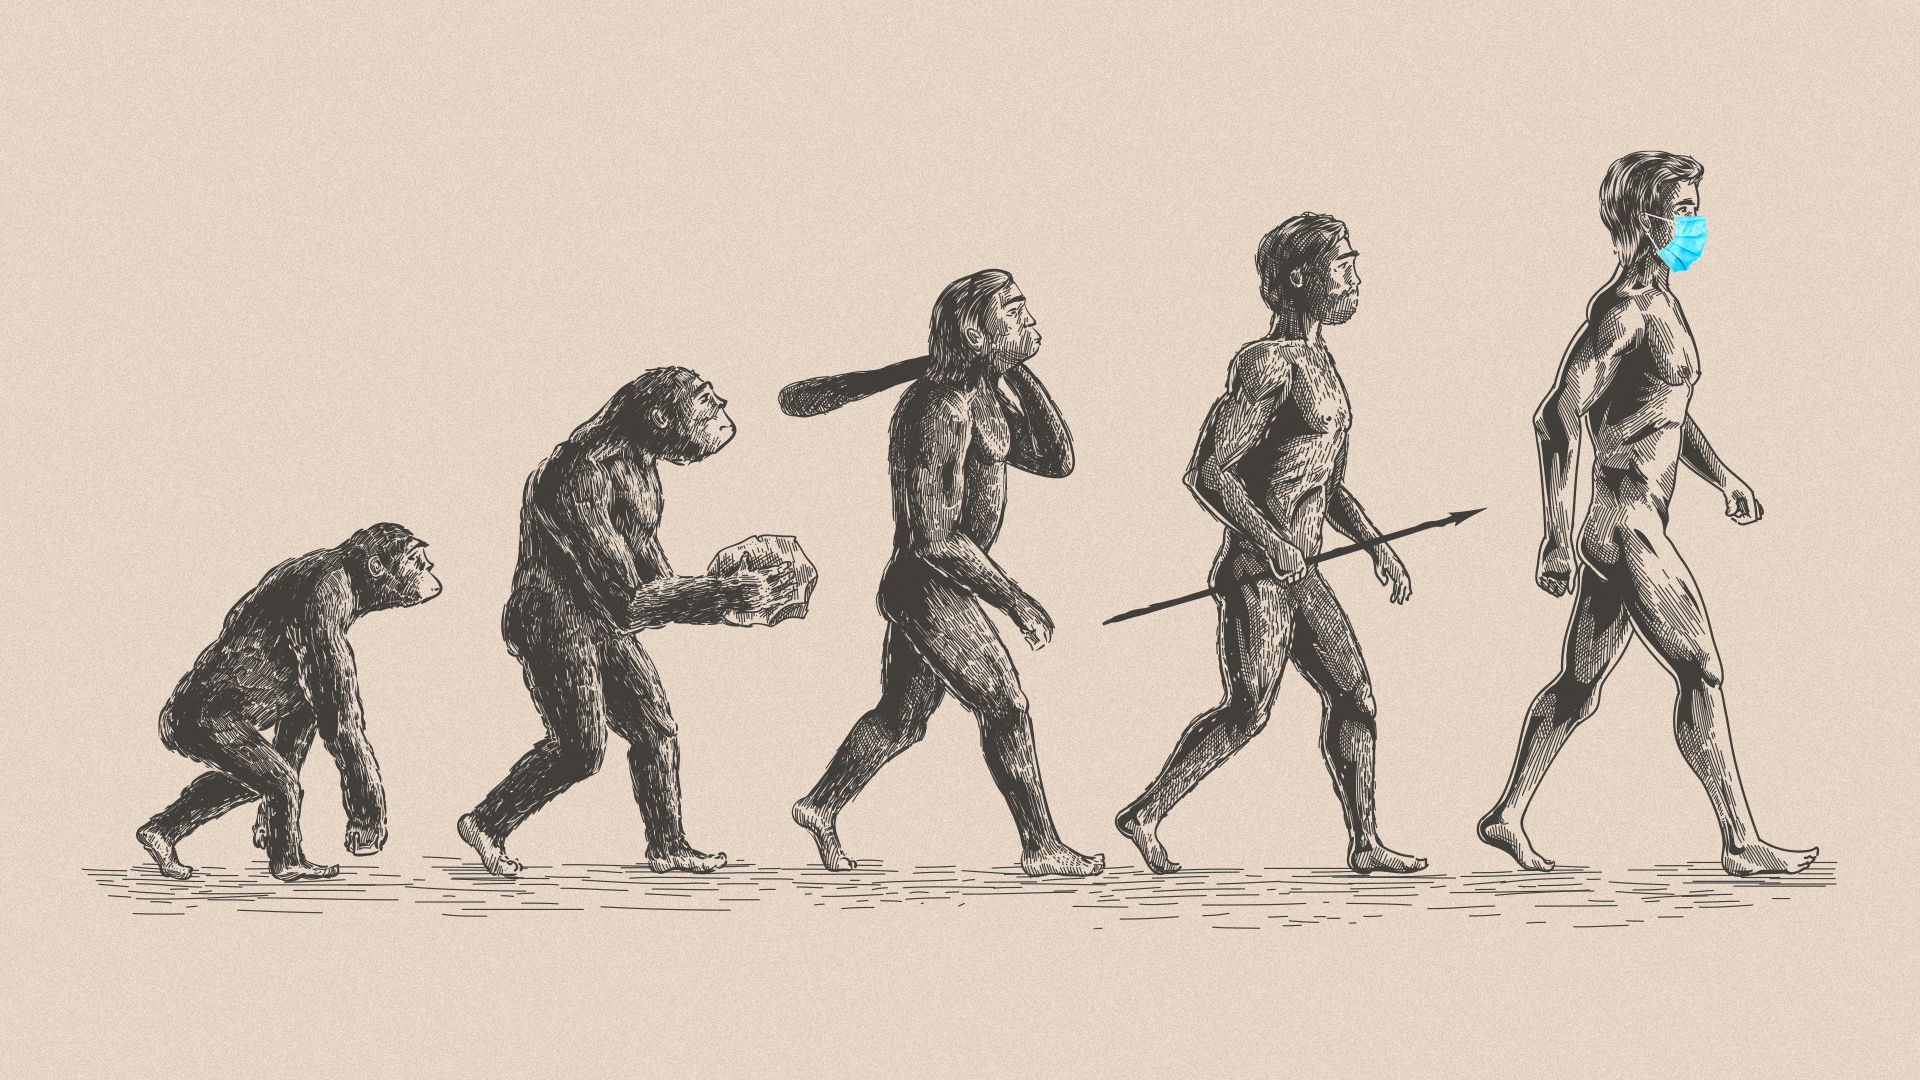 Illustration of the chart of human evolution with the final version of Man wearing a surgical mask.